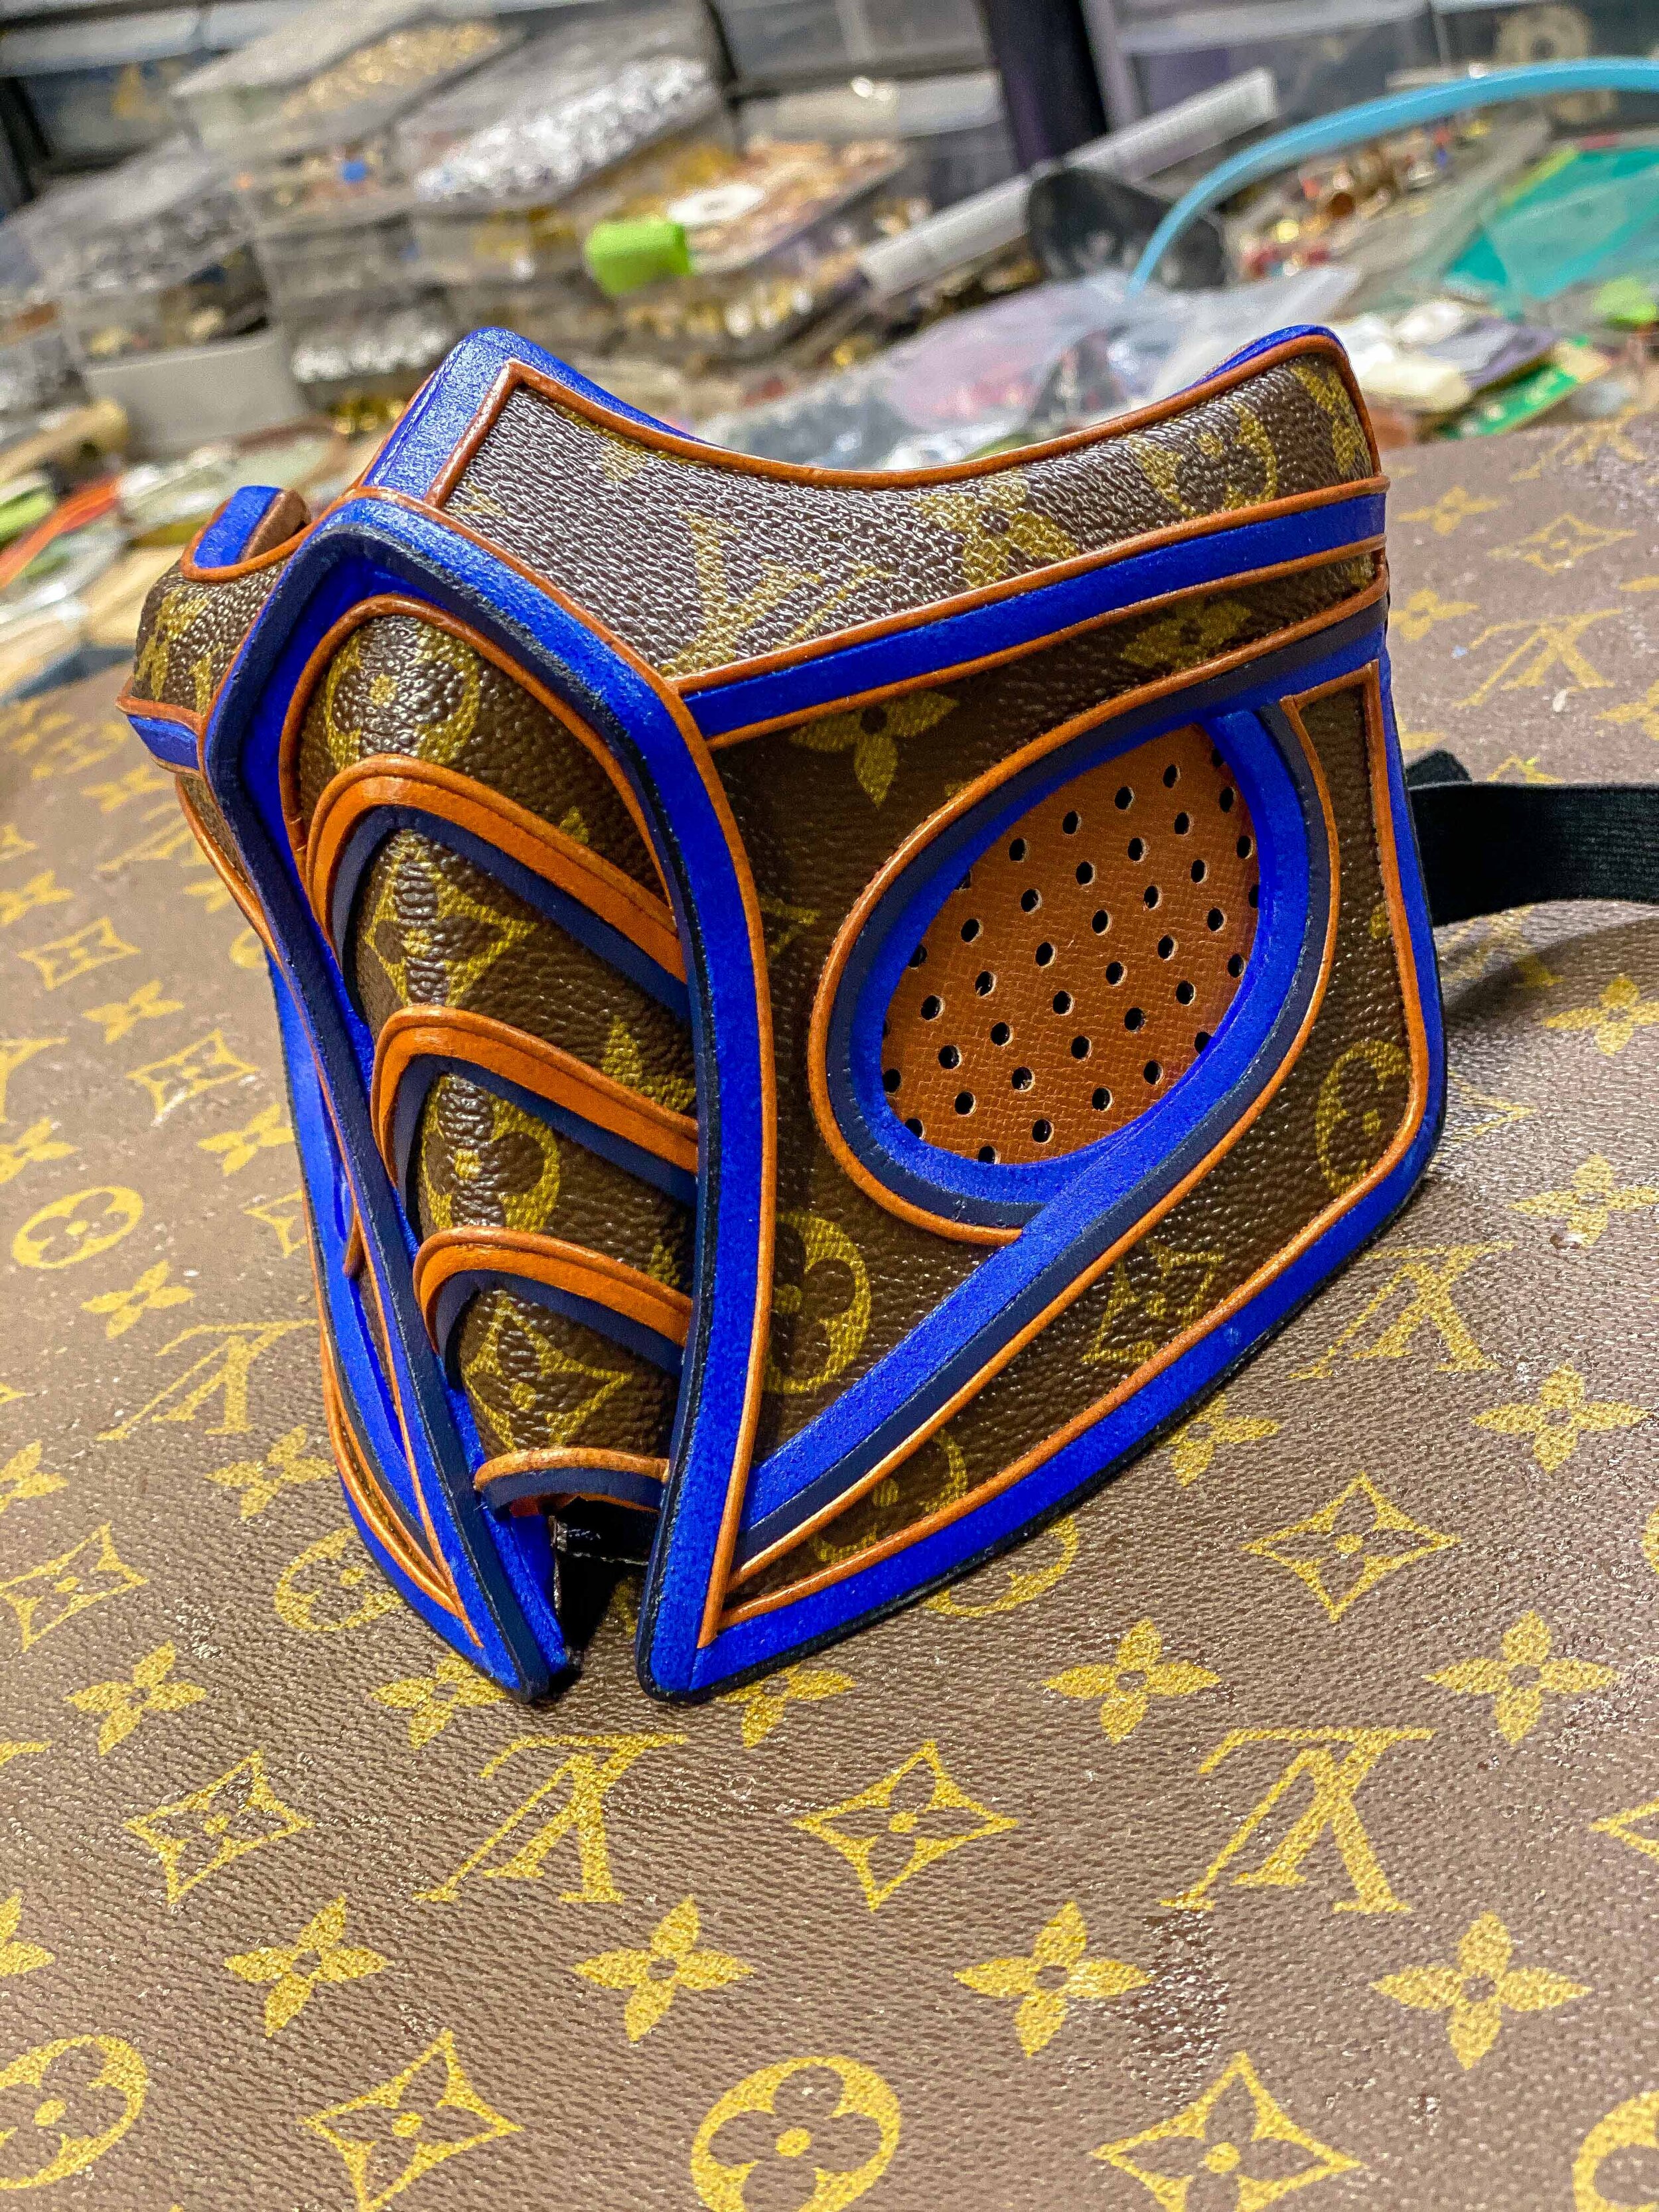 Gabriel Dishaw's Upcycled Creations - Which do you prefer Left or Right of  my latest LV inspired Sub Zero Masks from Mortal Kombat? - - - #subzero  #mortalkombat #mk11 #mkcollective #art #sculpture #